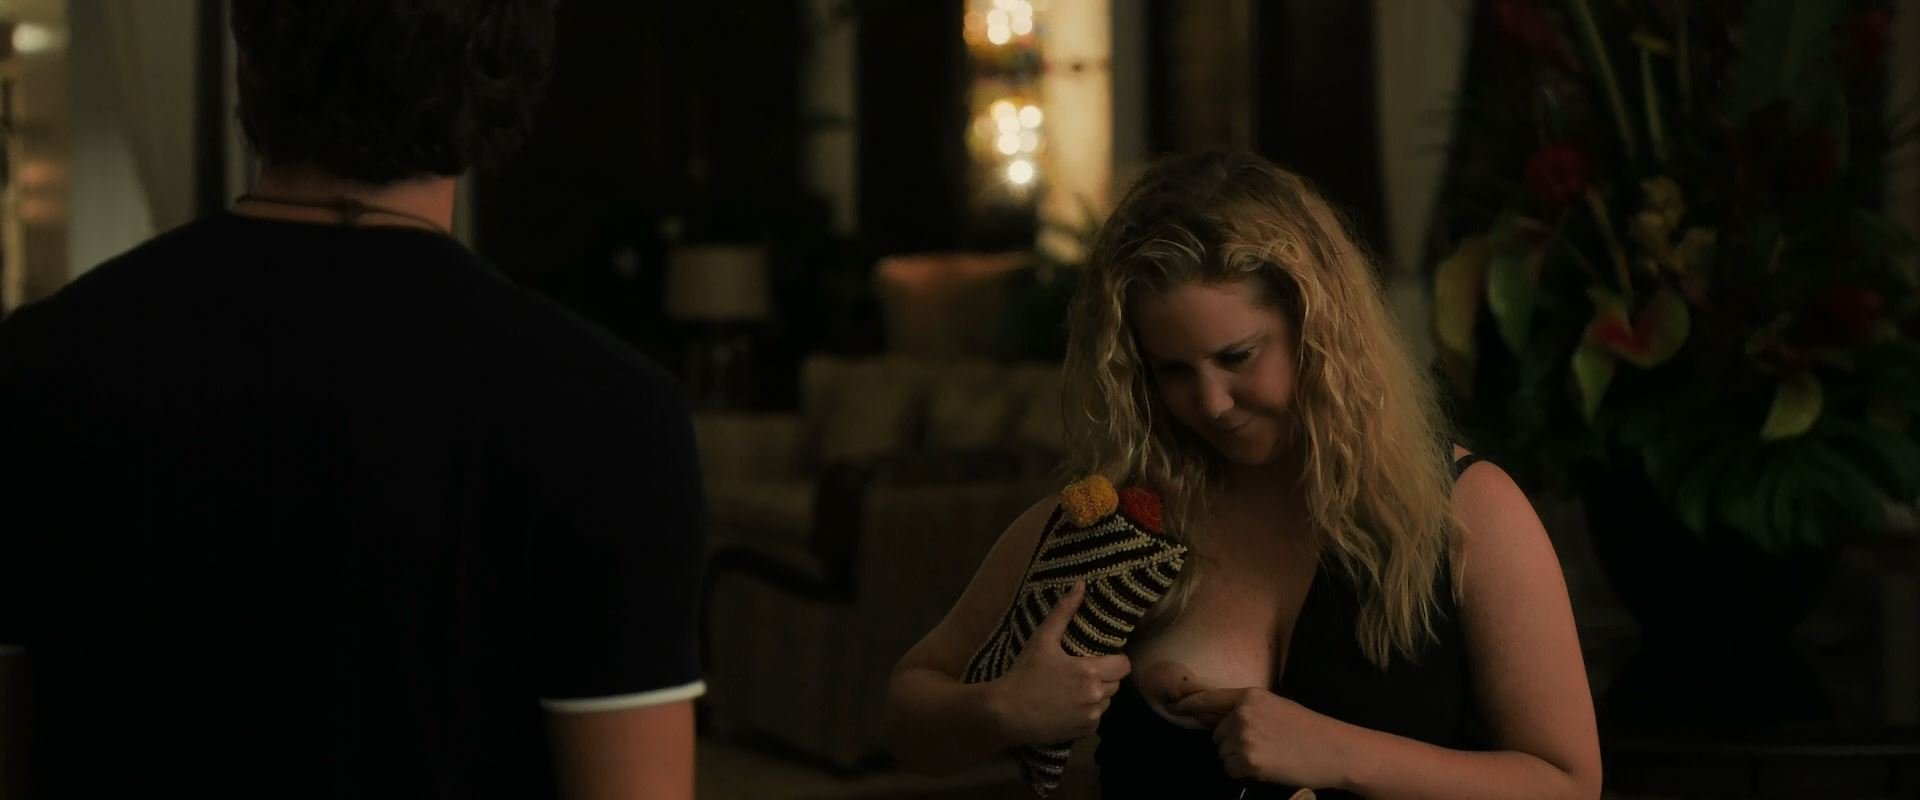 Amy Schumer Nude & Sexy - Snatched (2017) 1080p BluRay